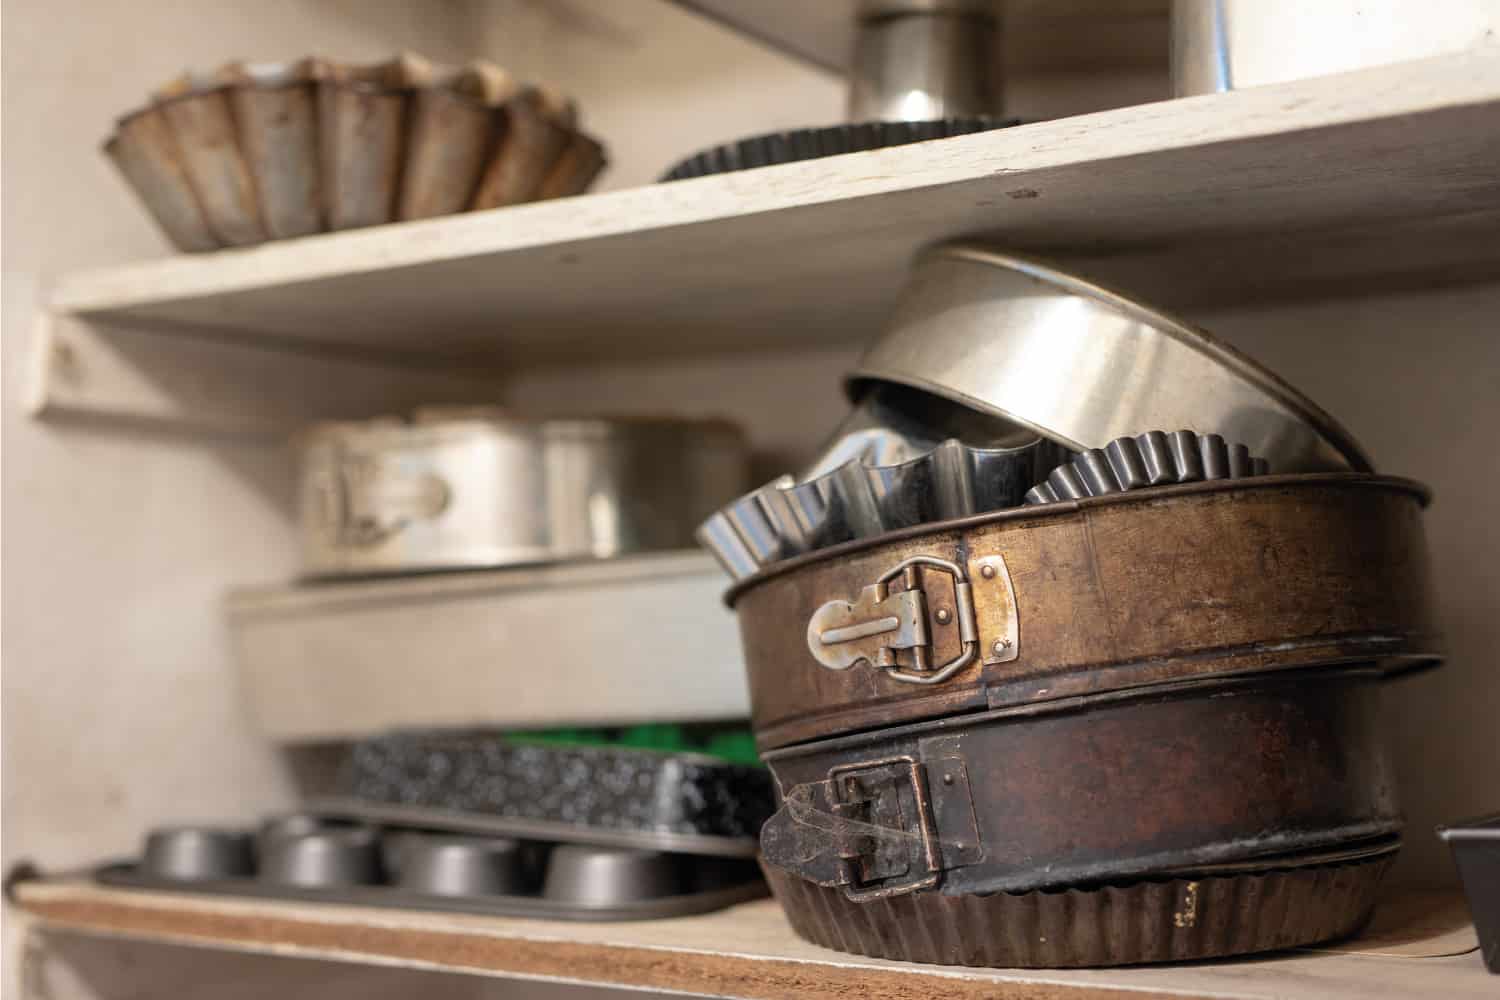 Baking accessories in an old kitchen